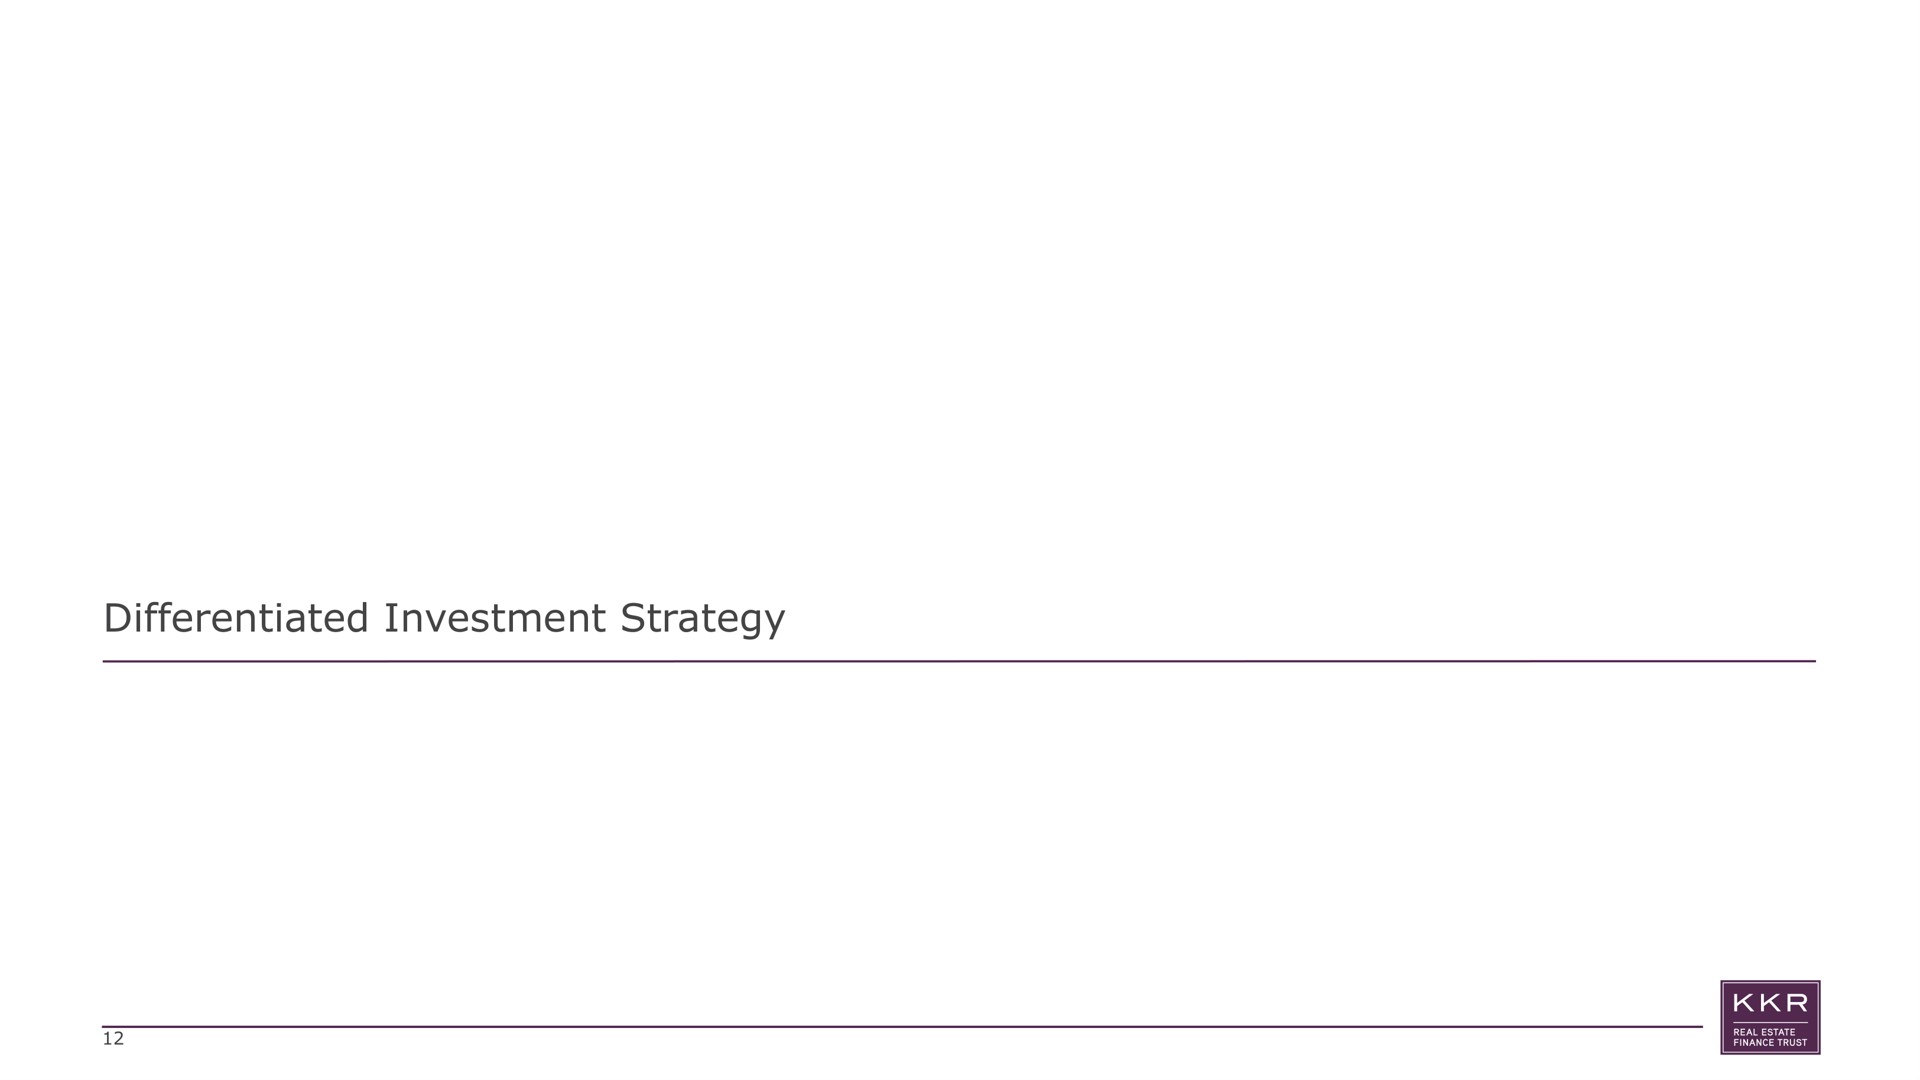 differentiated investment strategy | KKR Real Estate Finance Trust